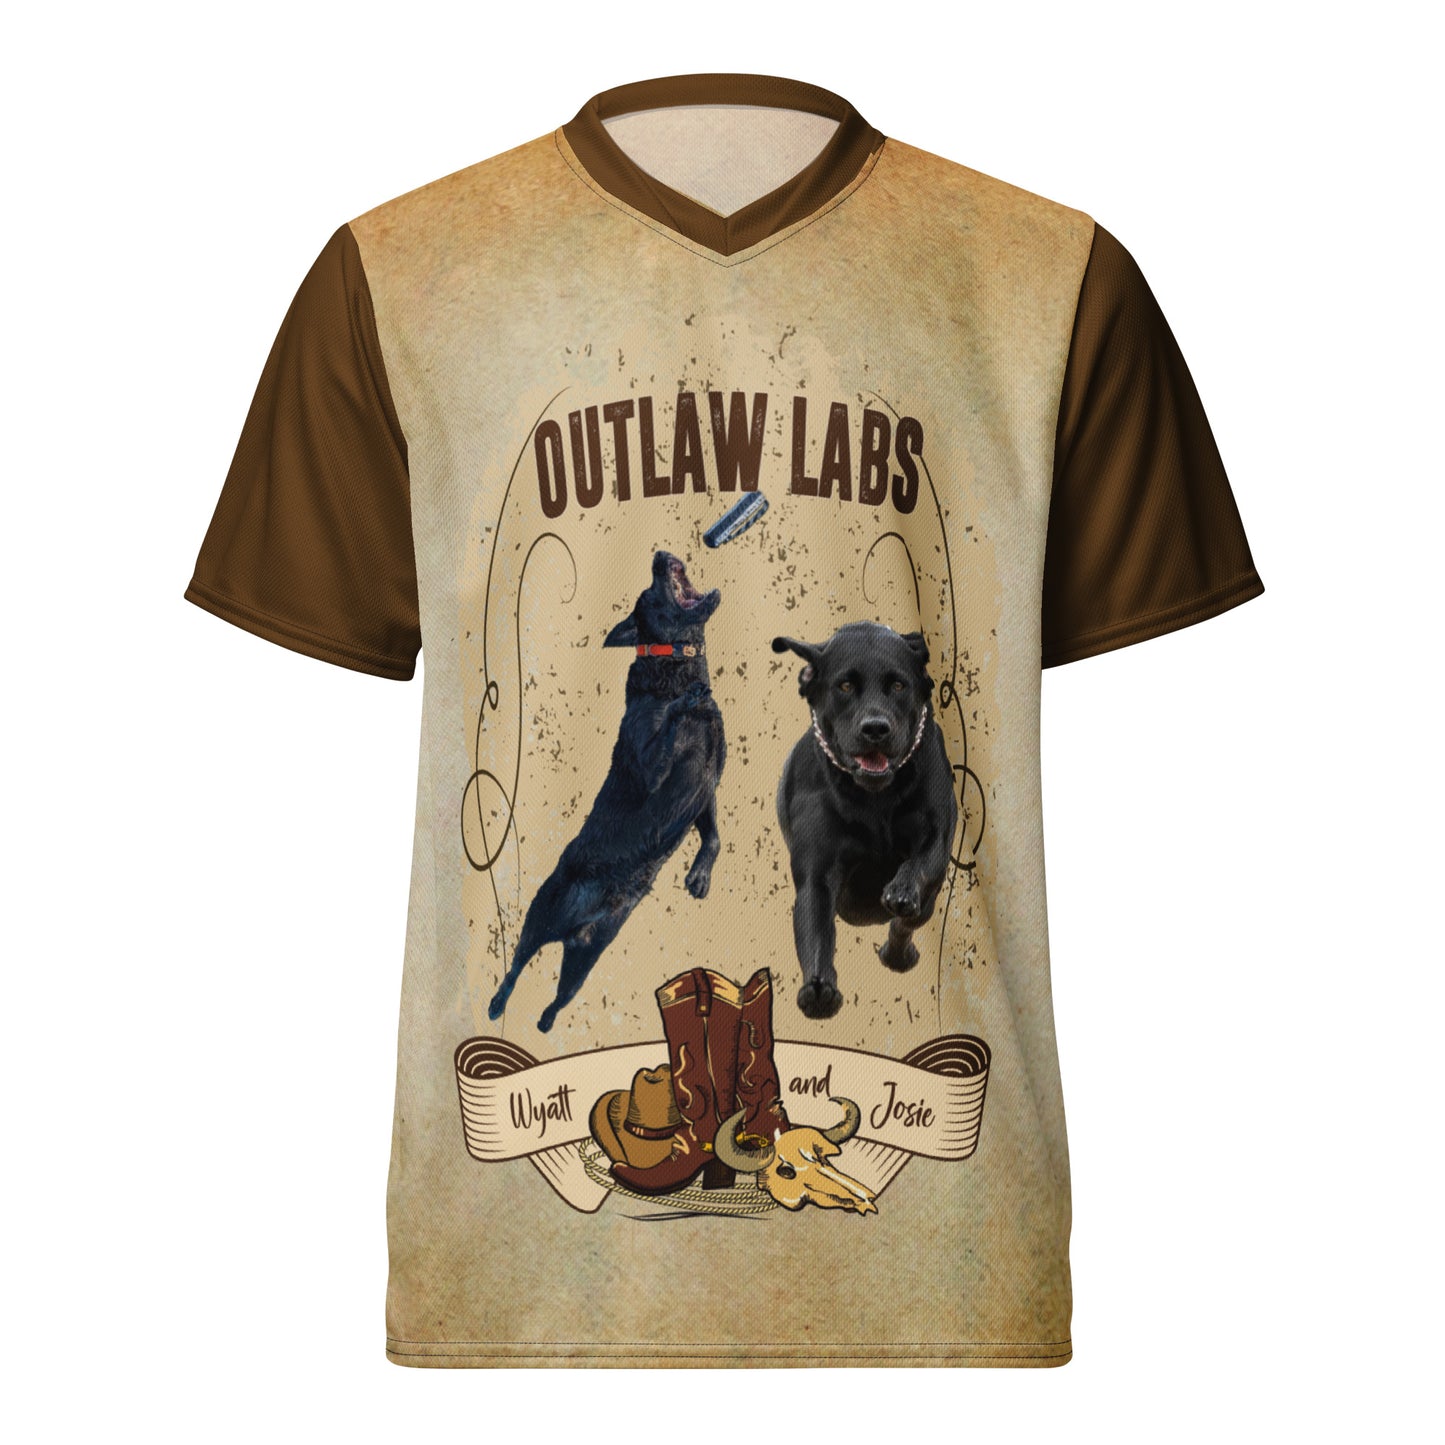 OUTLAW LABS Recycled unisex sports jersey